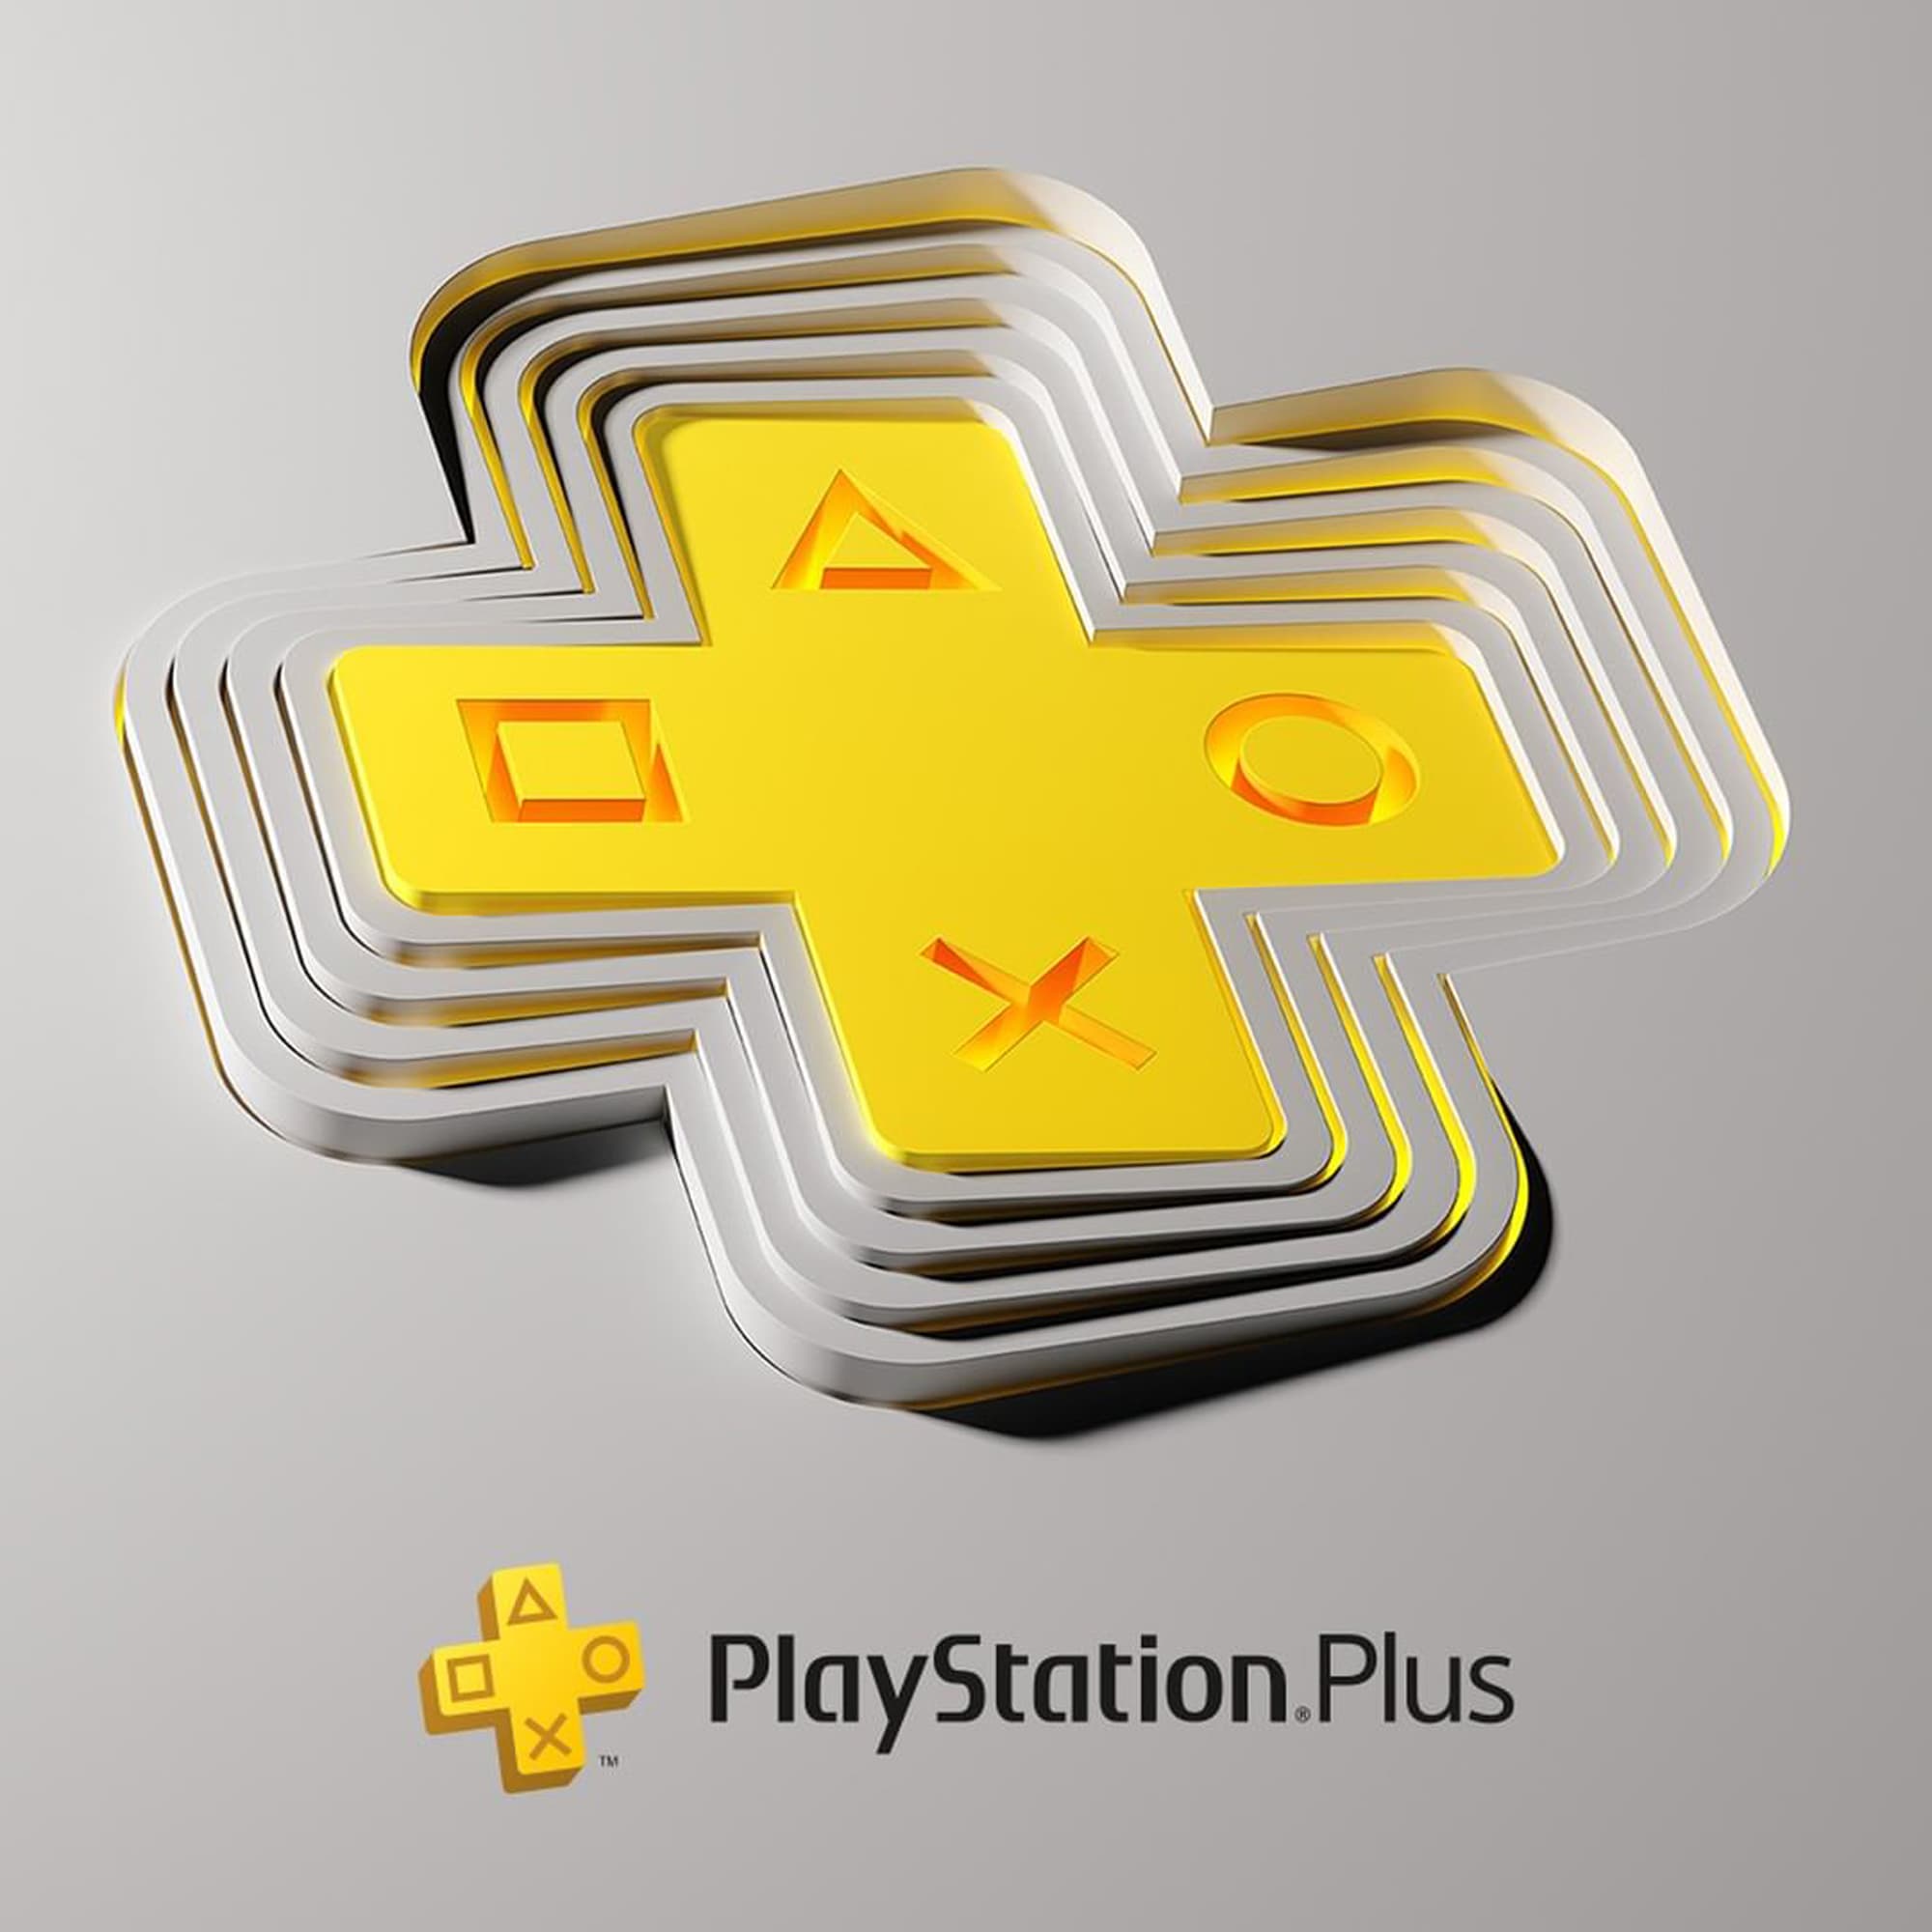 Guide to the New PS Plus Tier Prices